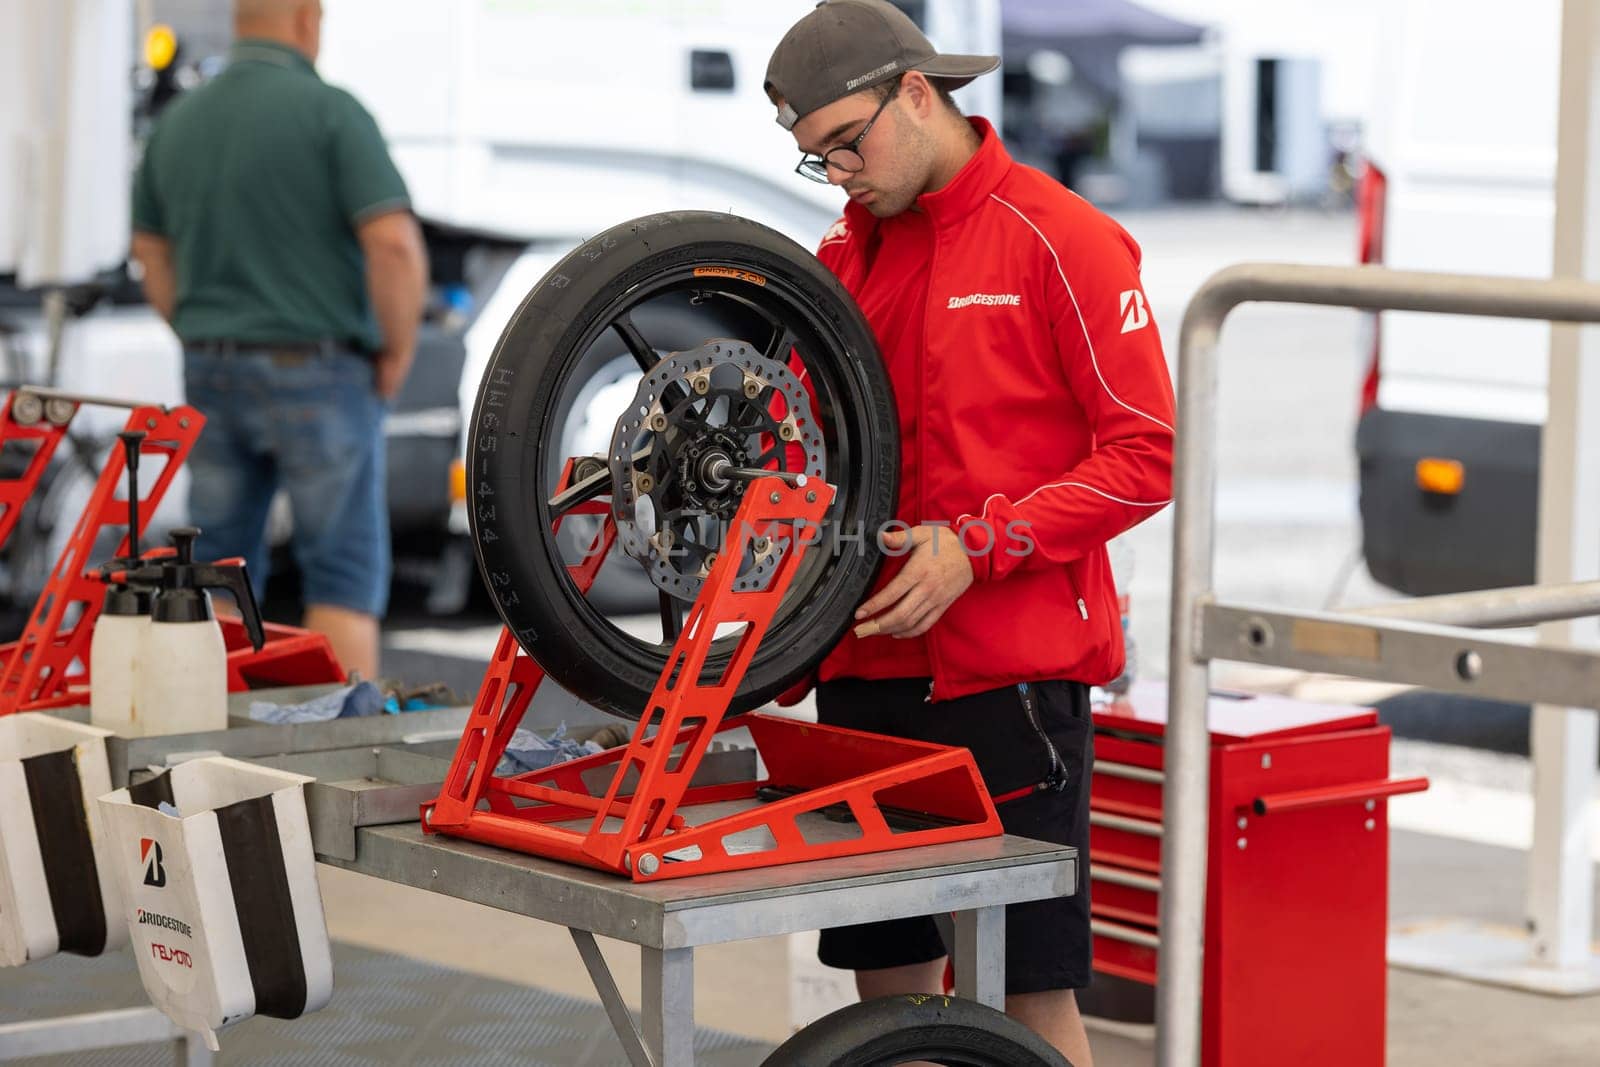 6 may 2023, Estoril, Portugal - MotoGP racing - The Mechanic's Skillful Hands: Repairing a Motorcycle Tire in a Garage by Studia72